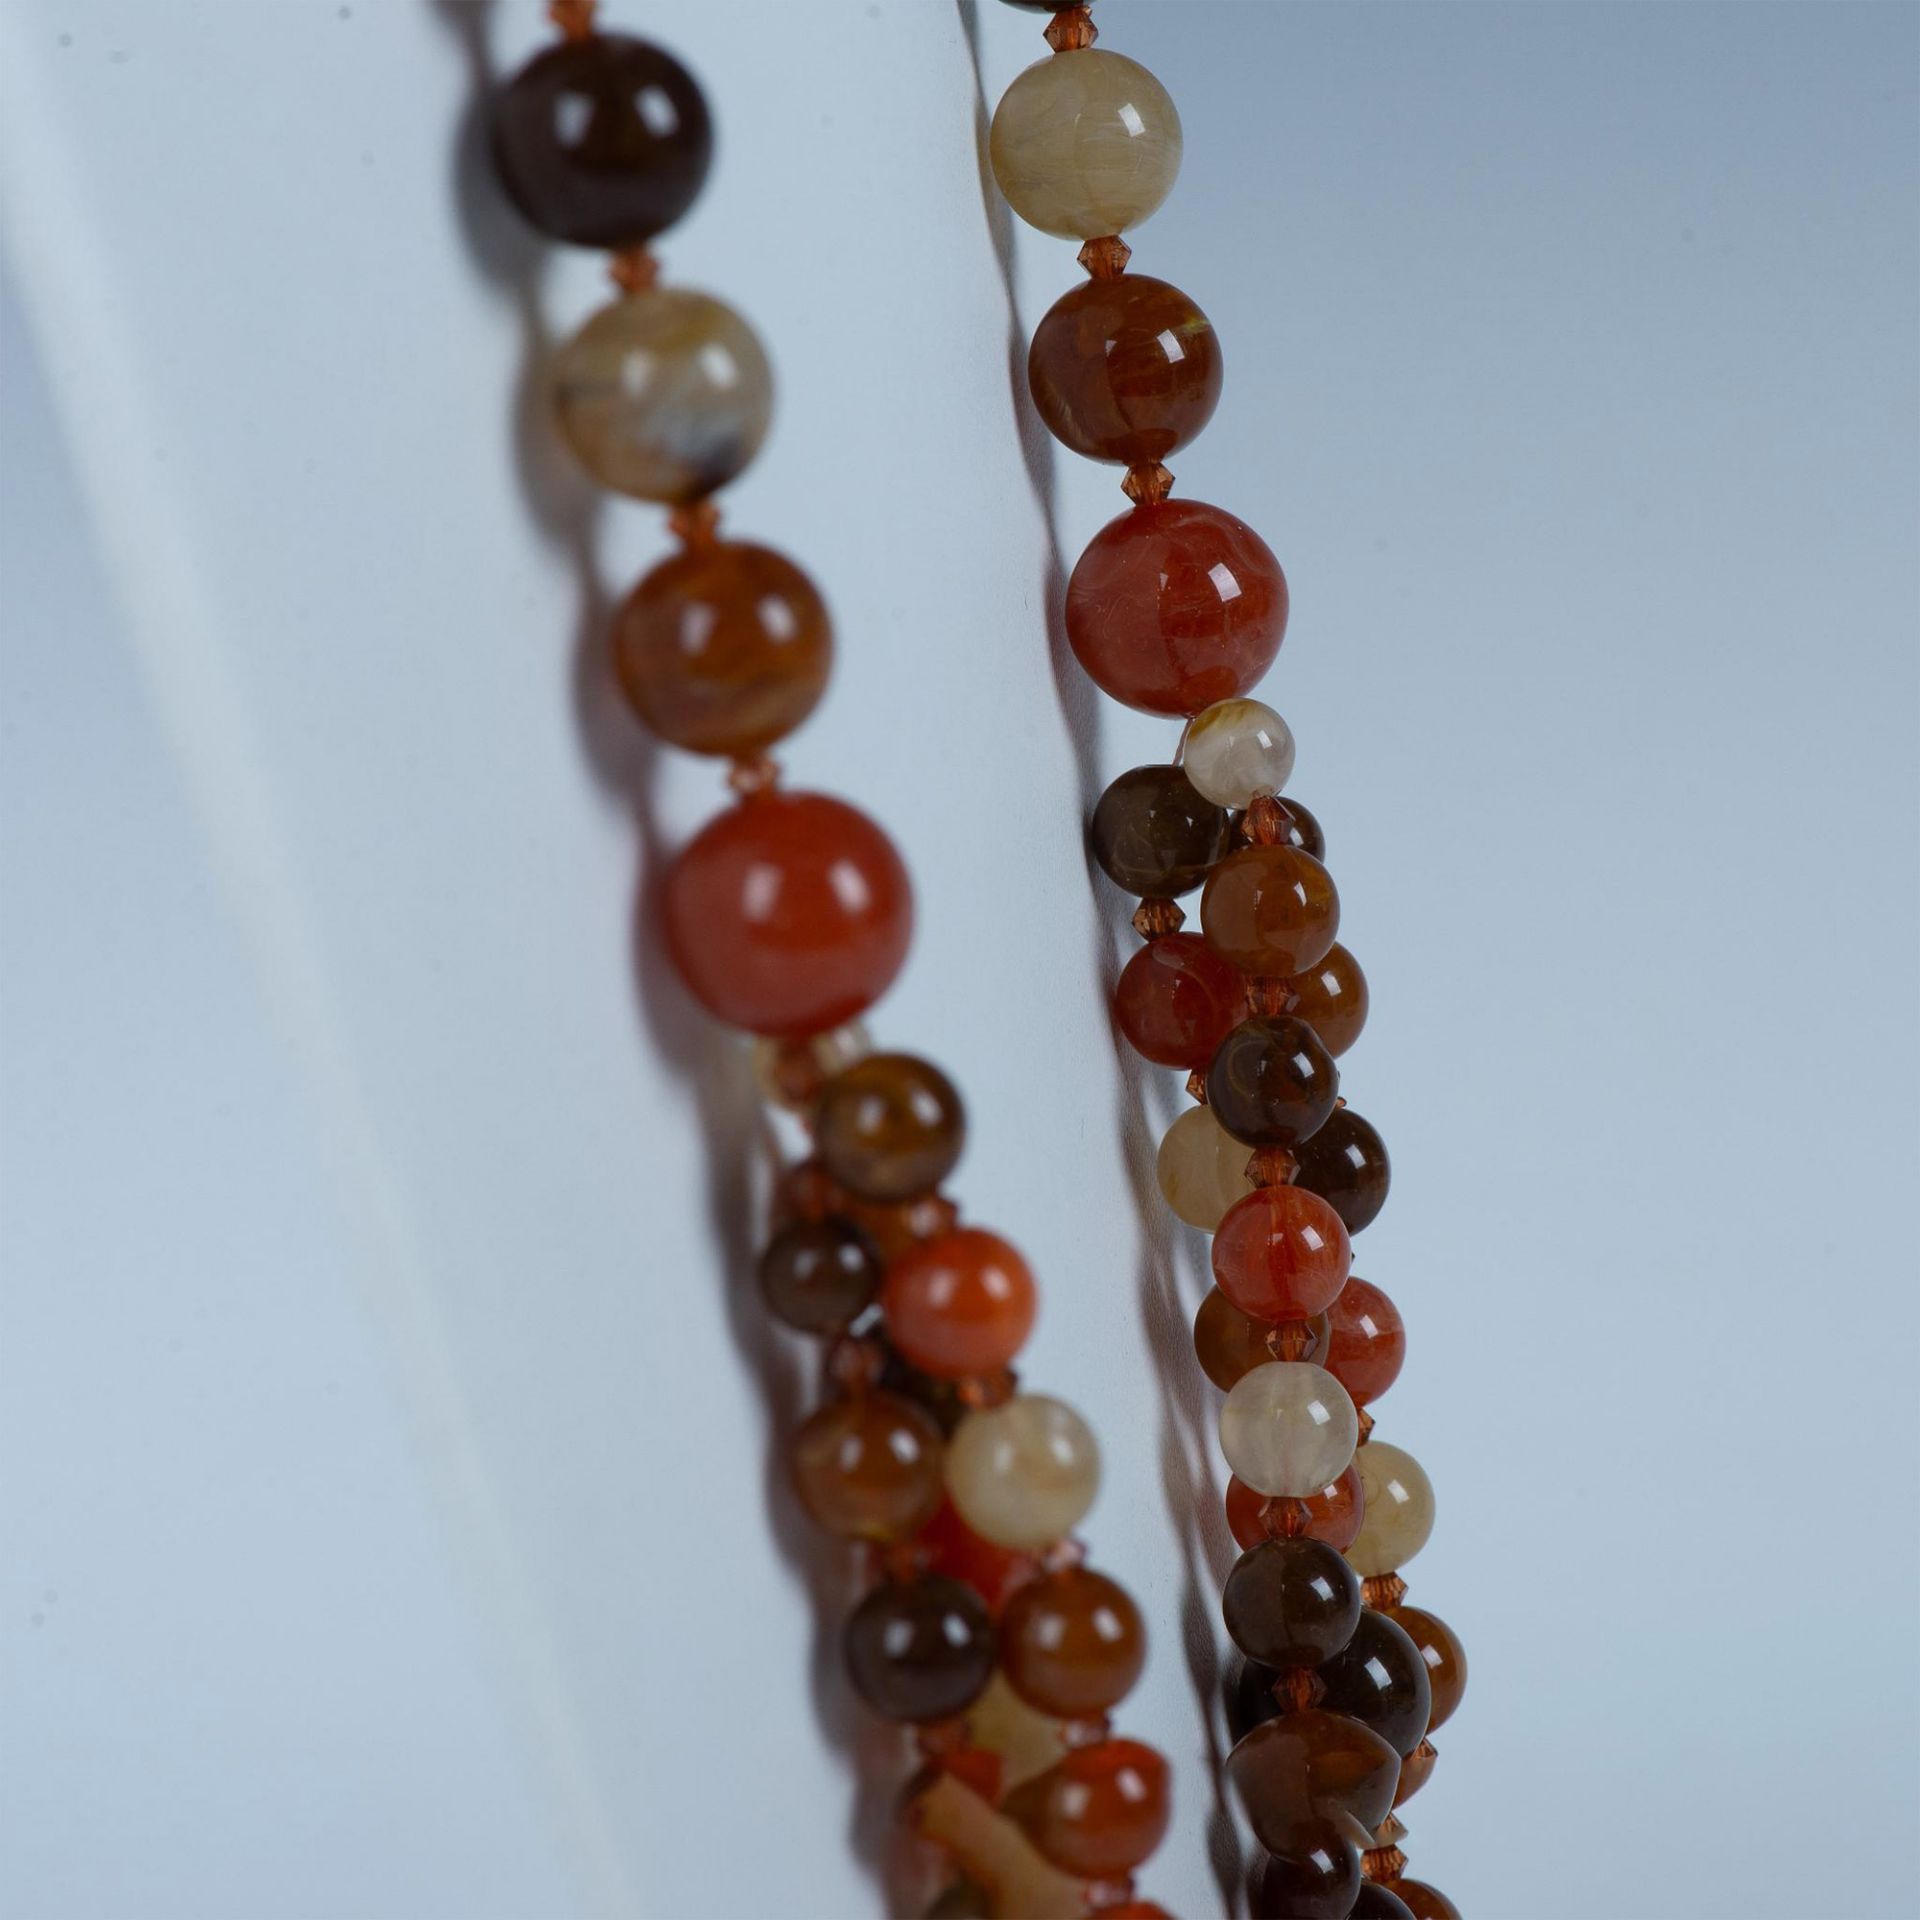 Beautiful Multi-Strand Marbled Brown & Red Bead Necklace - Image 3 of 4